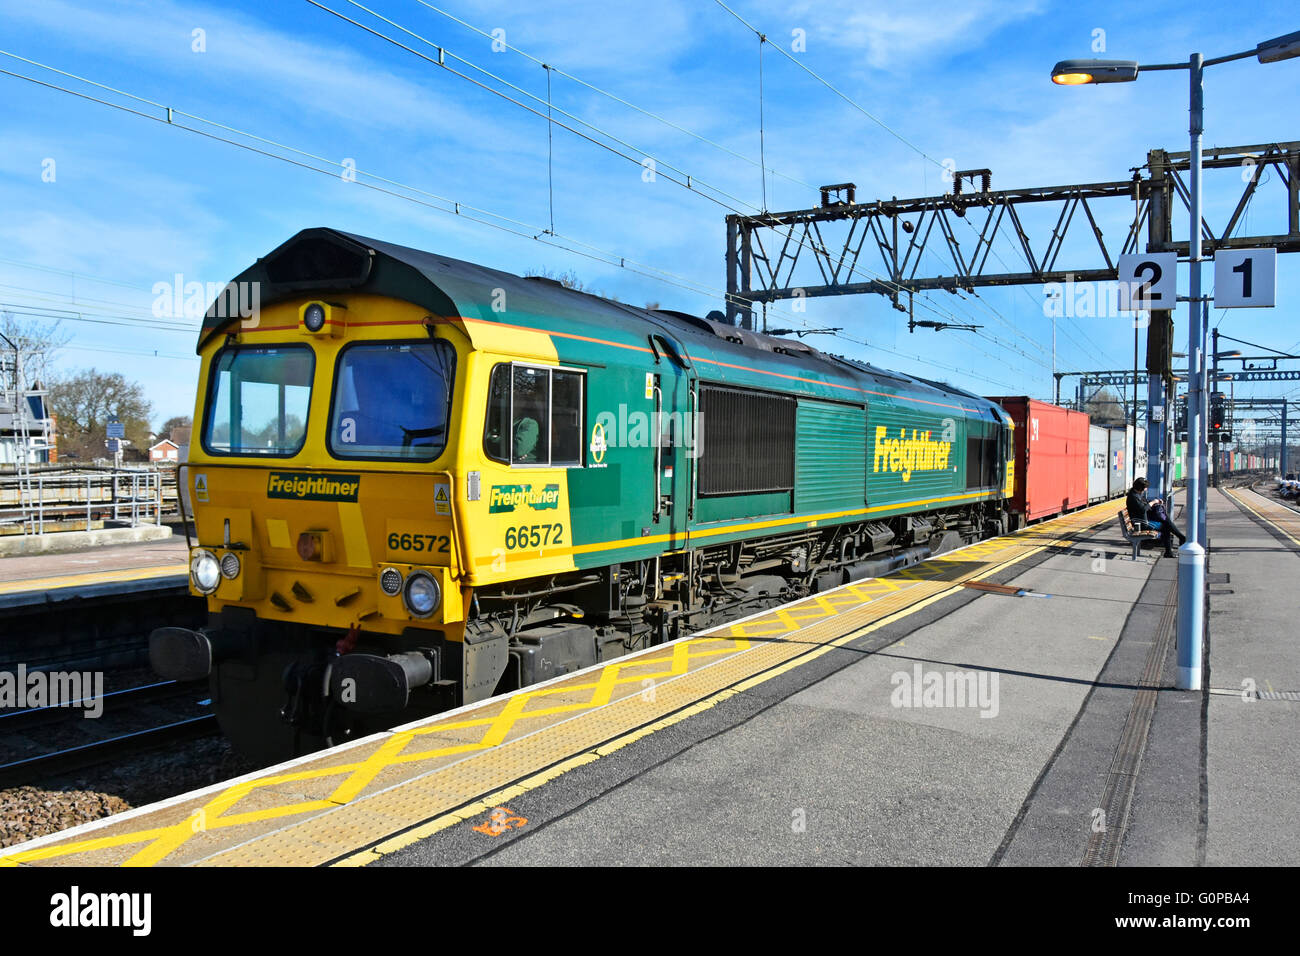 Freightliner locomotive 66572 on a shipping container train passing through Shenfield train station heading towards London England UK Stock Photo